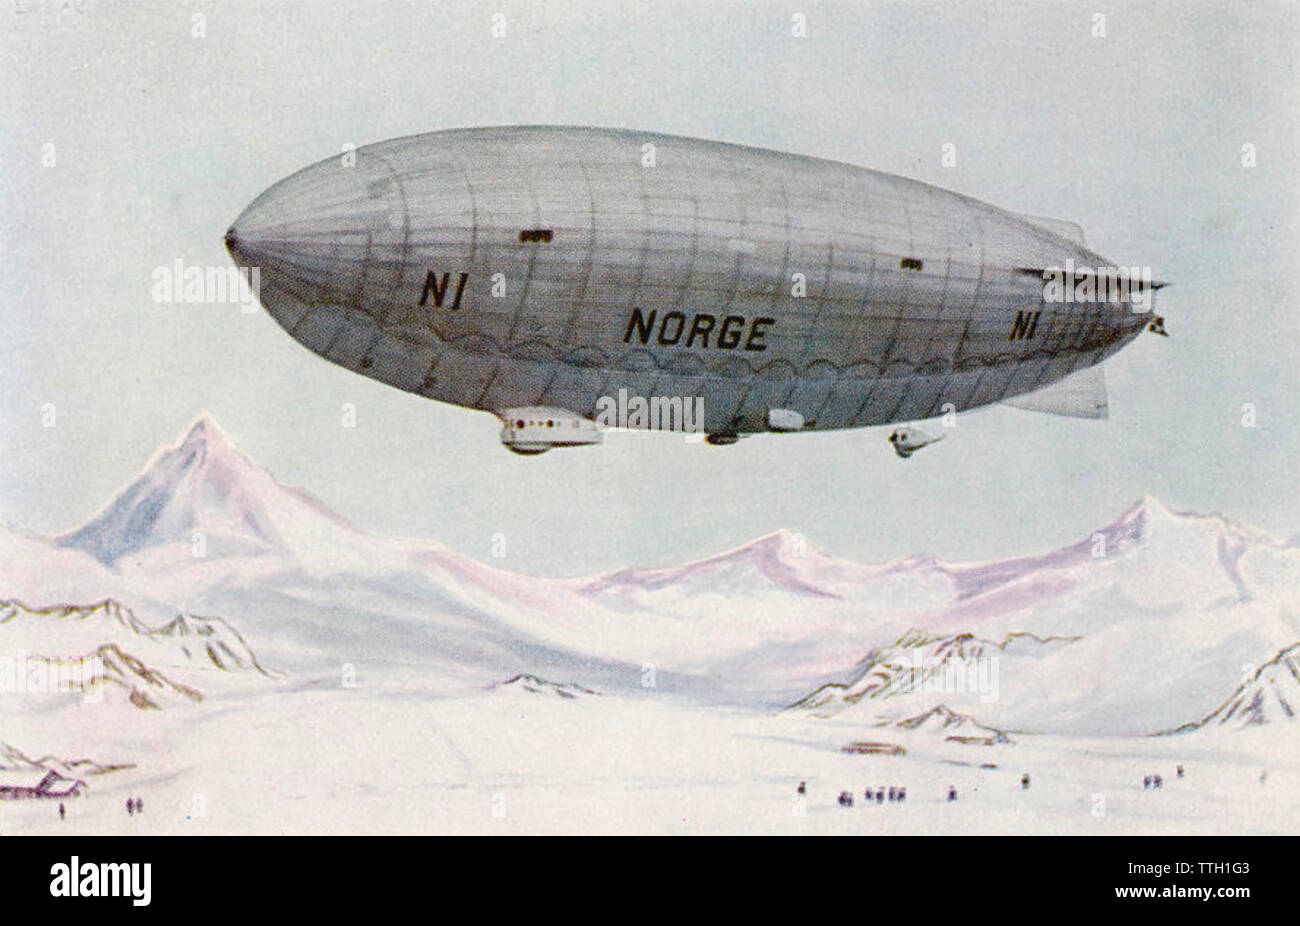 NORGE AIRSHIP on its trip to the North Pole in 1926 Stock Photo